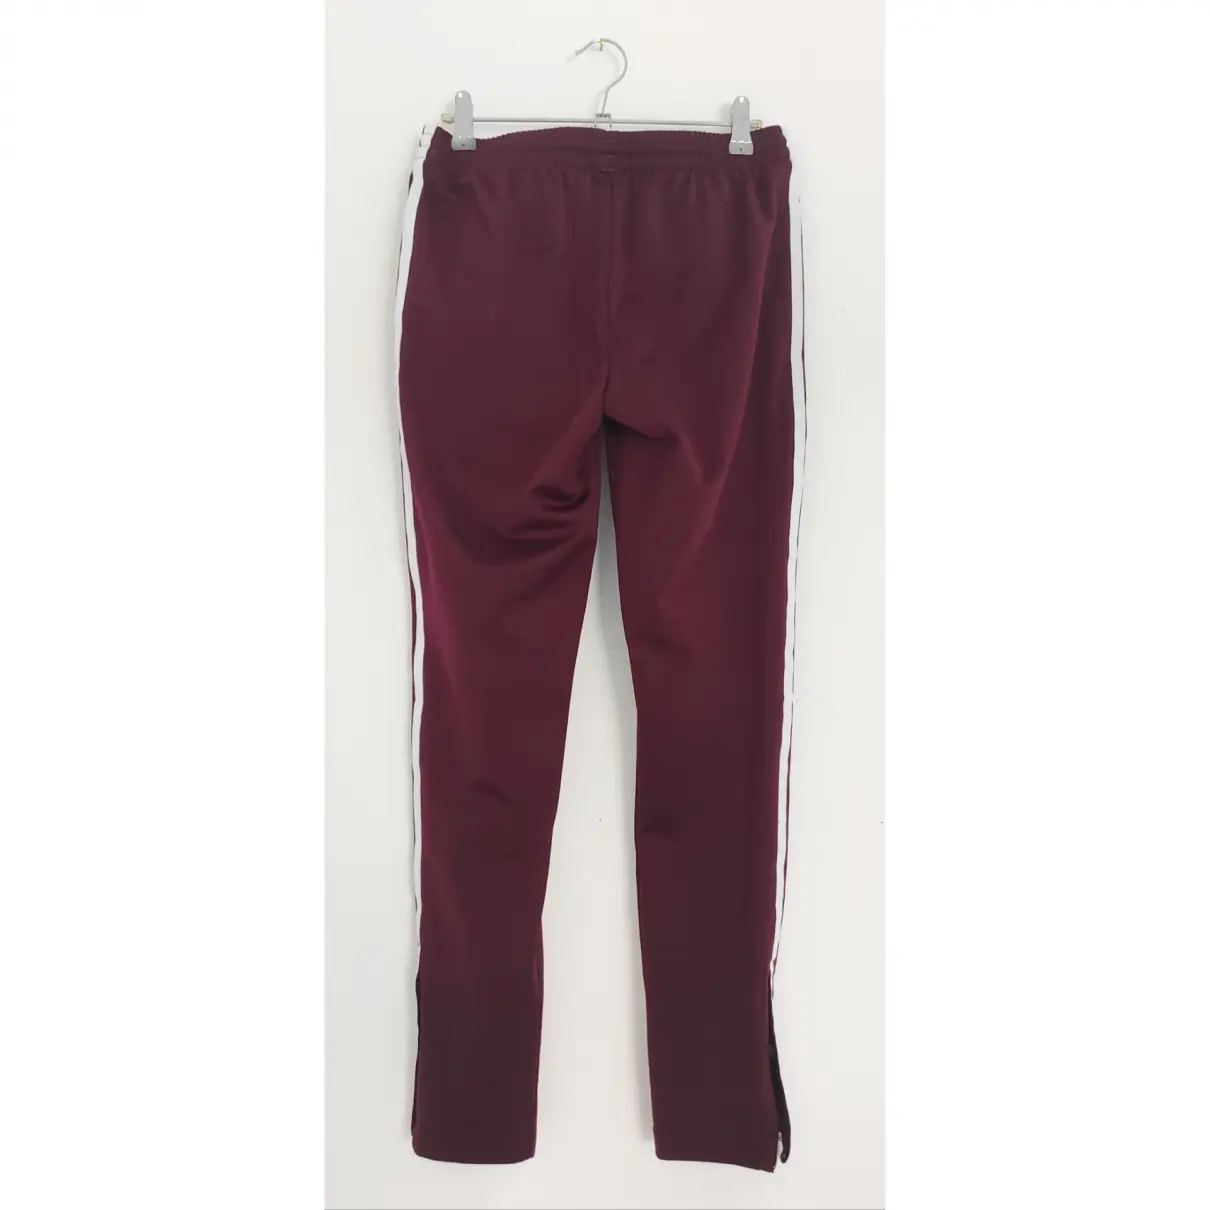 Buy Adidas Trousers online